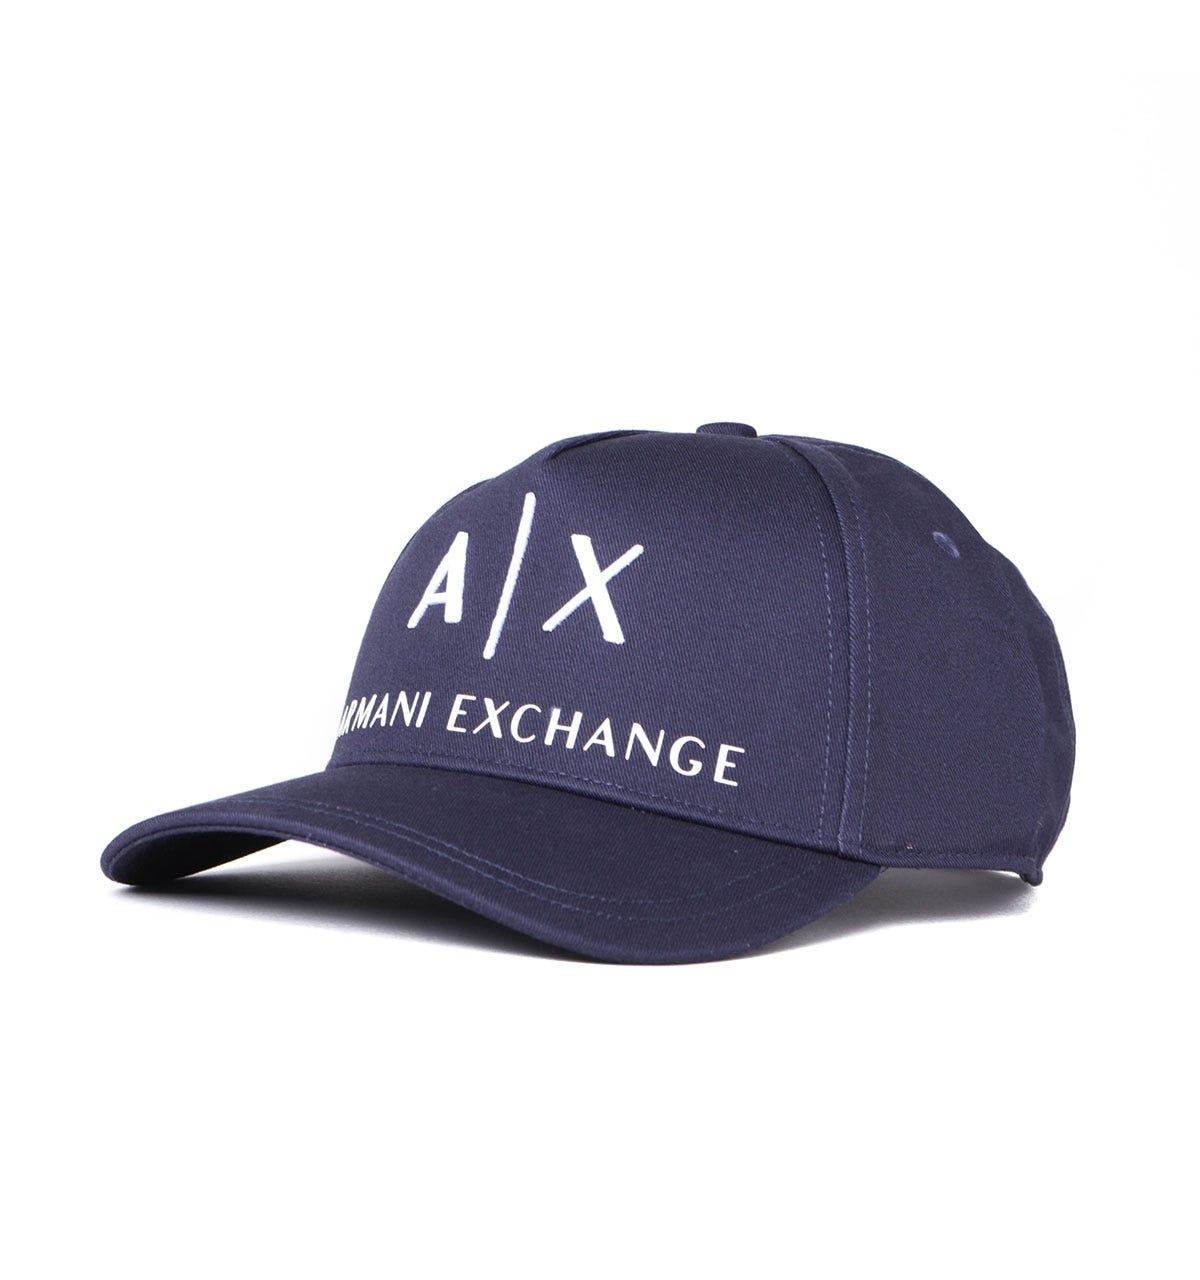 Armani Exchange Leather Contrast Logo Navy Cap in Blue for Men - Lyst